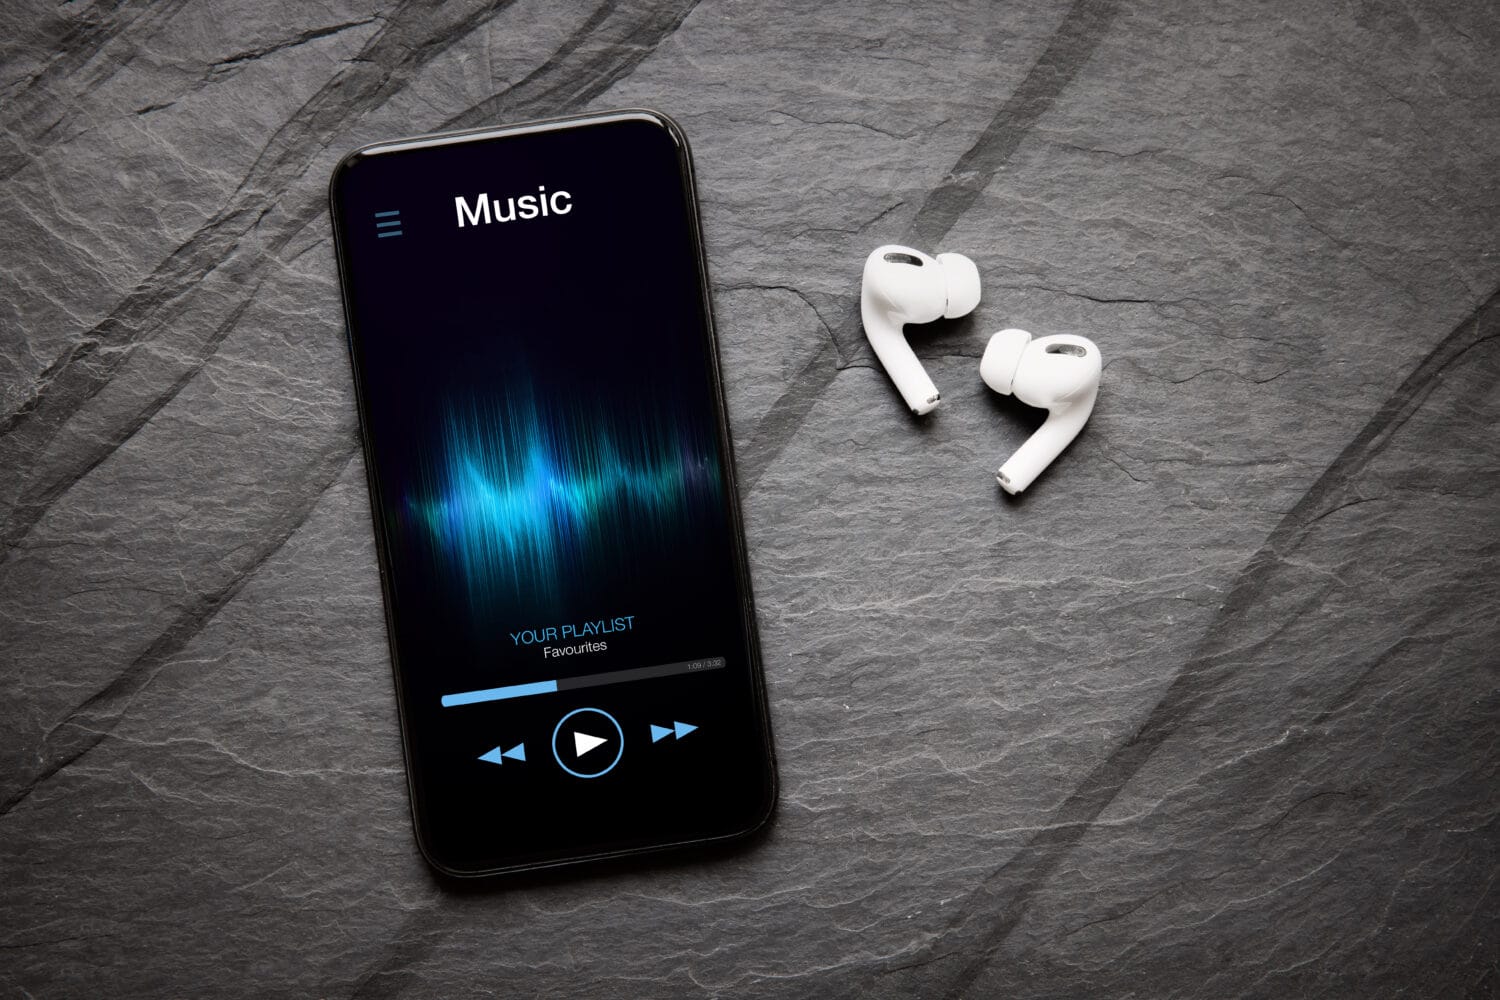 Music player on mobile phone and wireless earbuds